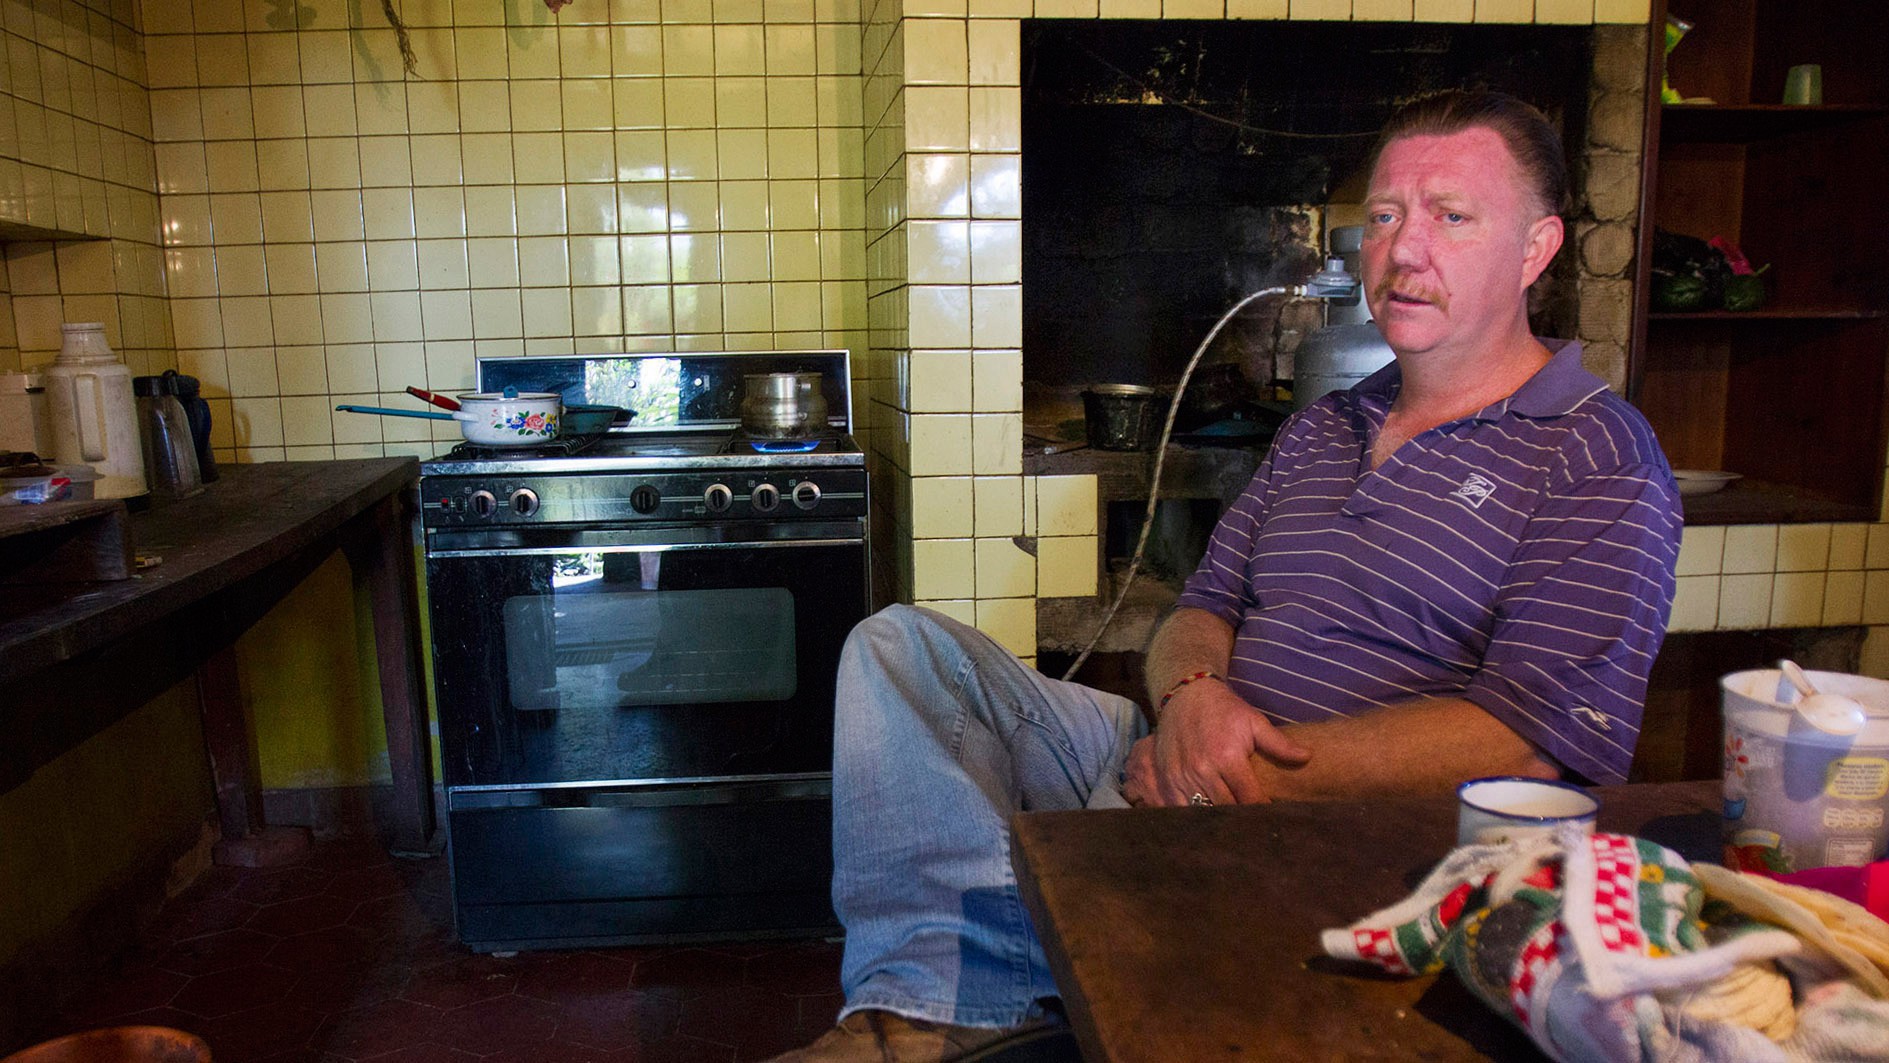 Virgil Edwards sits in the kitchen of a home that was half burned down by the invaders. (Photo by Connor Radnovich.)